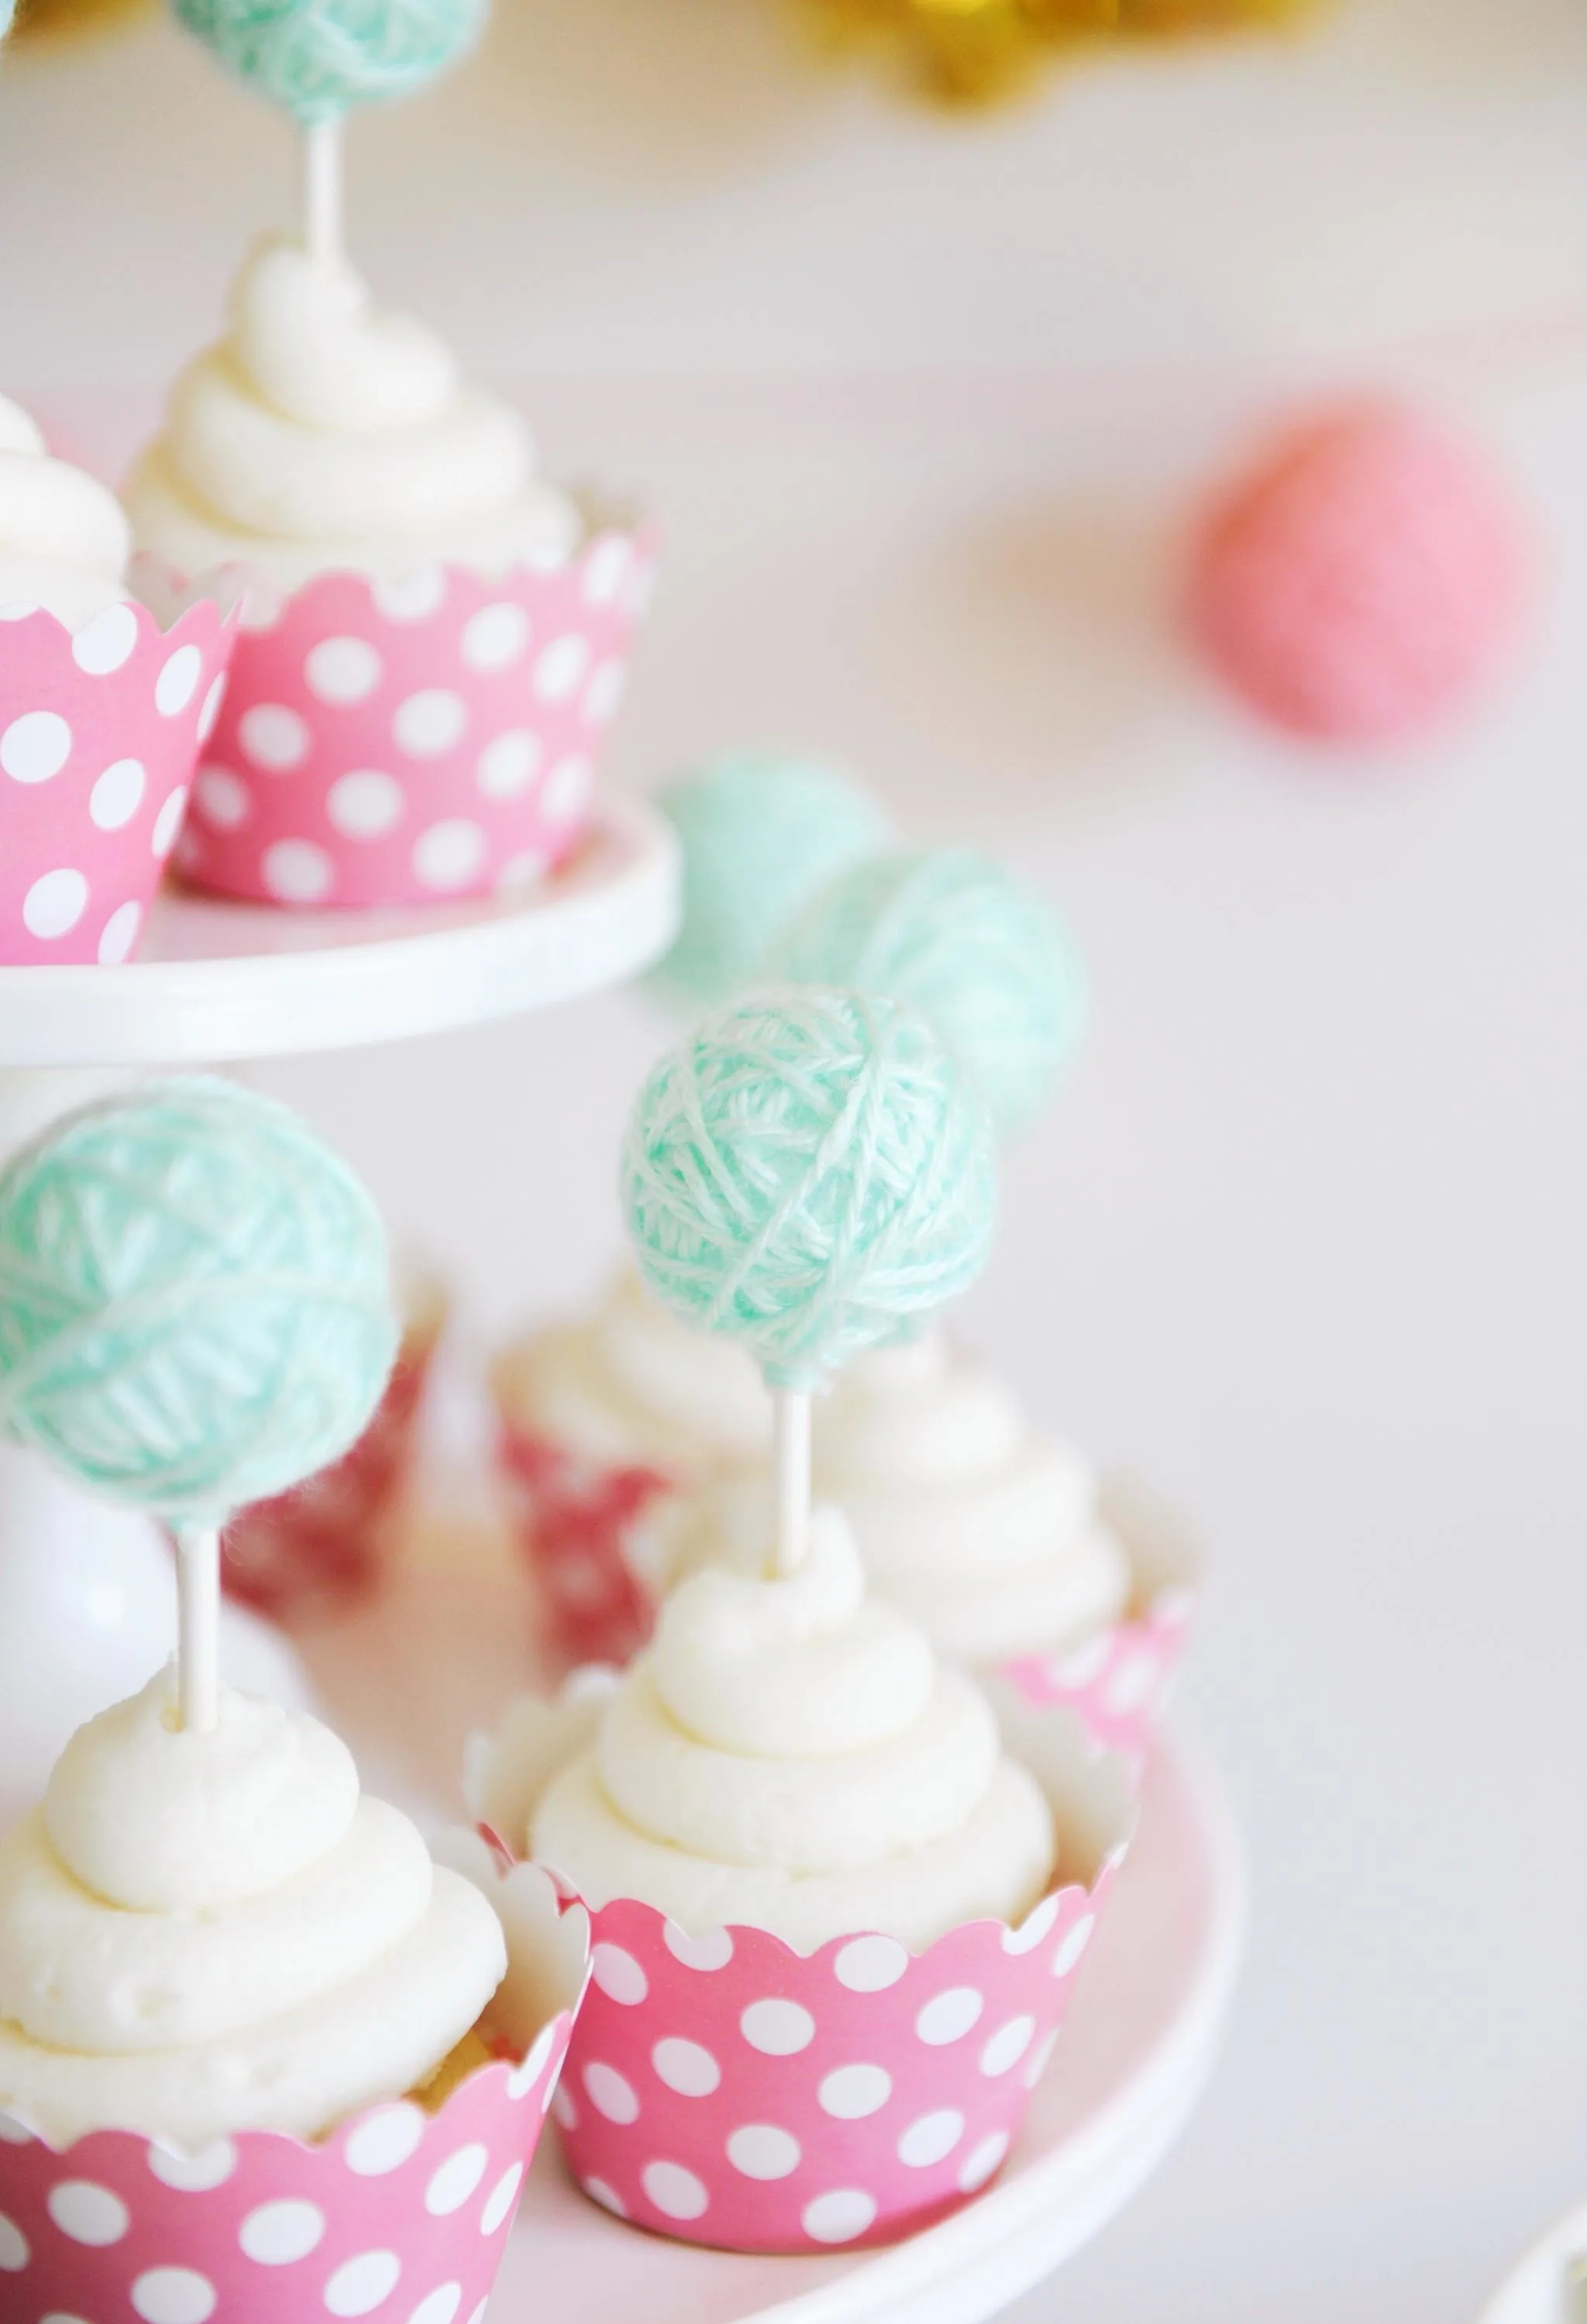 Cupcakes with Yarn Ball Toppers